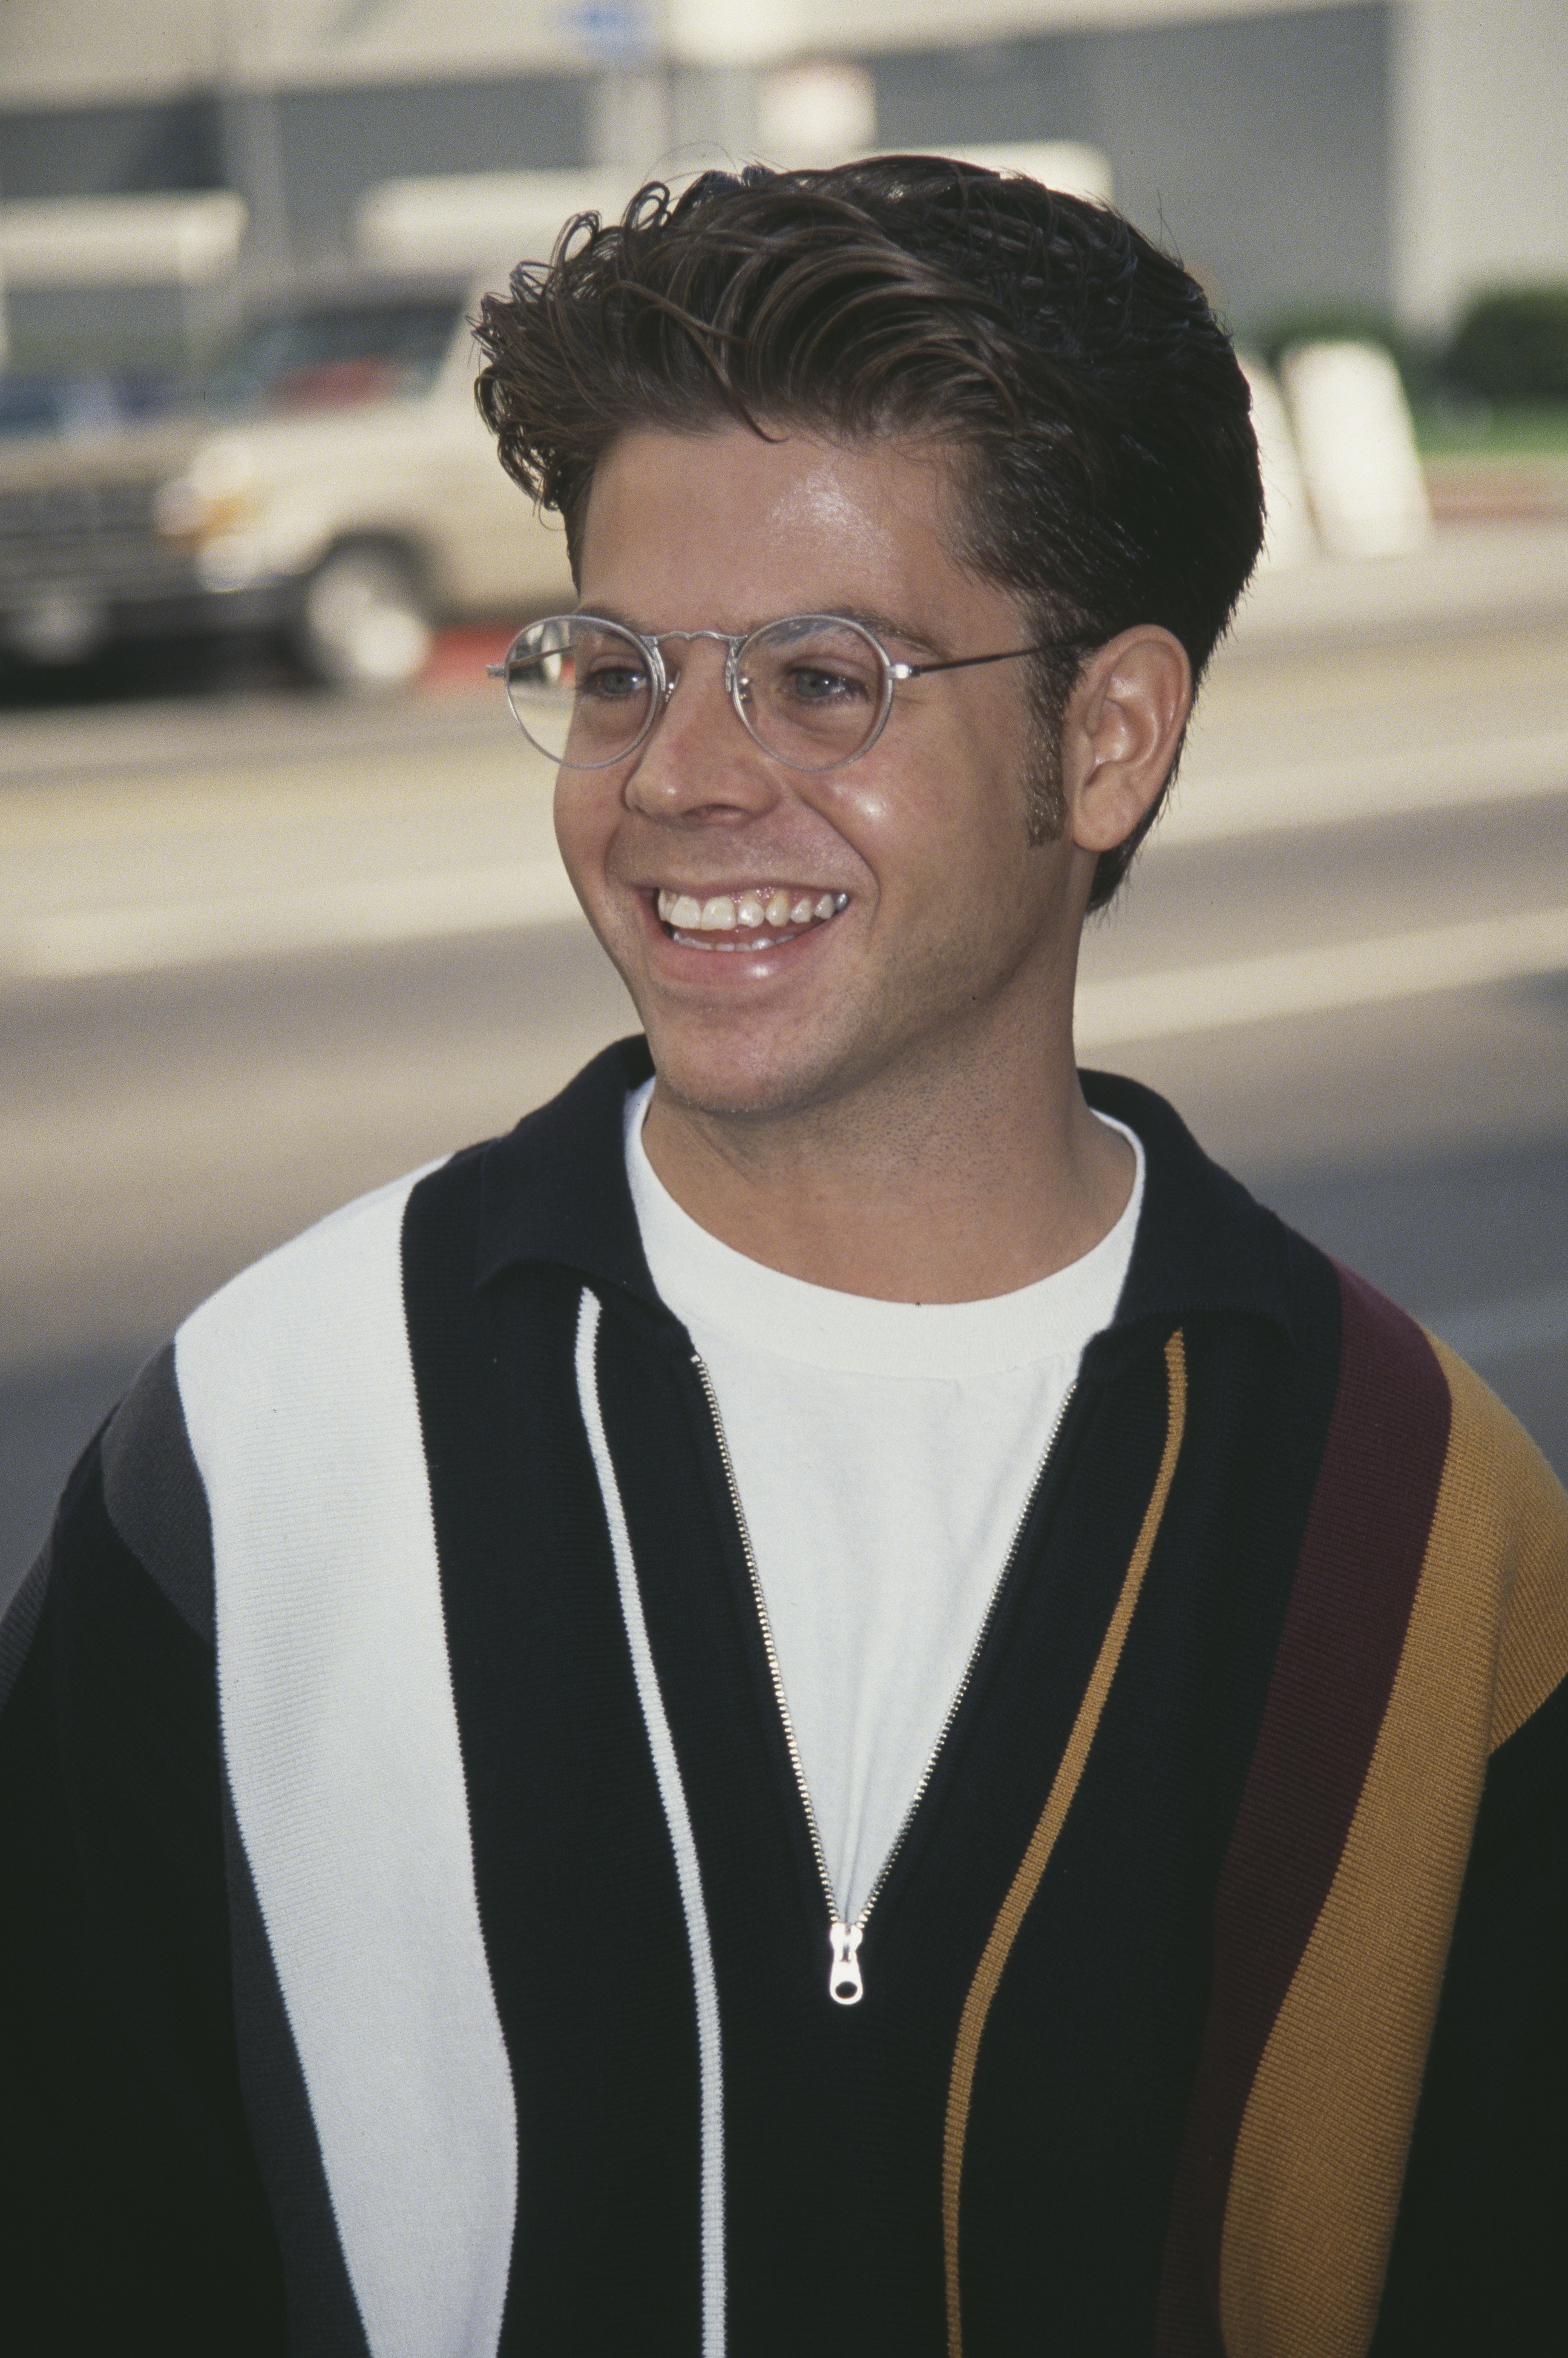 Adam Rich attends the premiere of "The Three Musketeers" at the Pacific's Cinerama Dome on November 7, 1993 in Los Angeles, California | Source: Getty Images